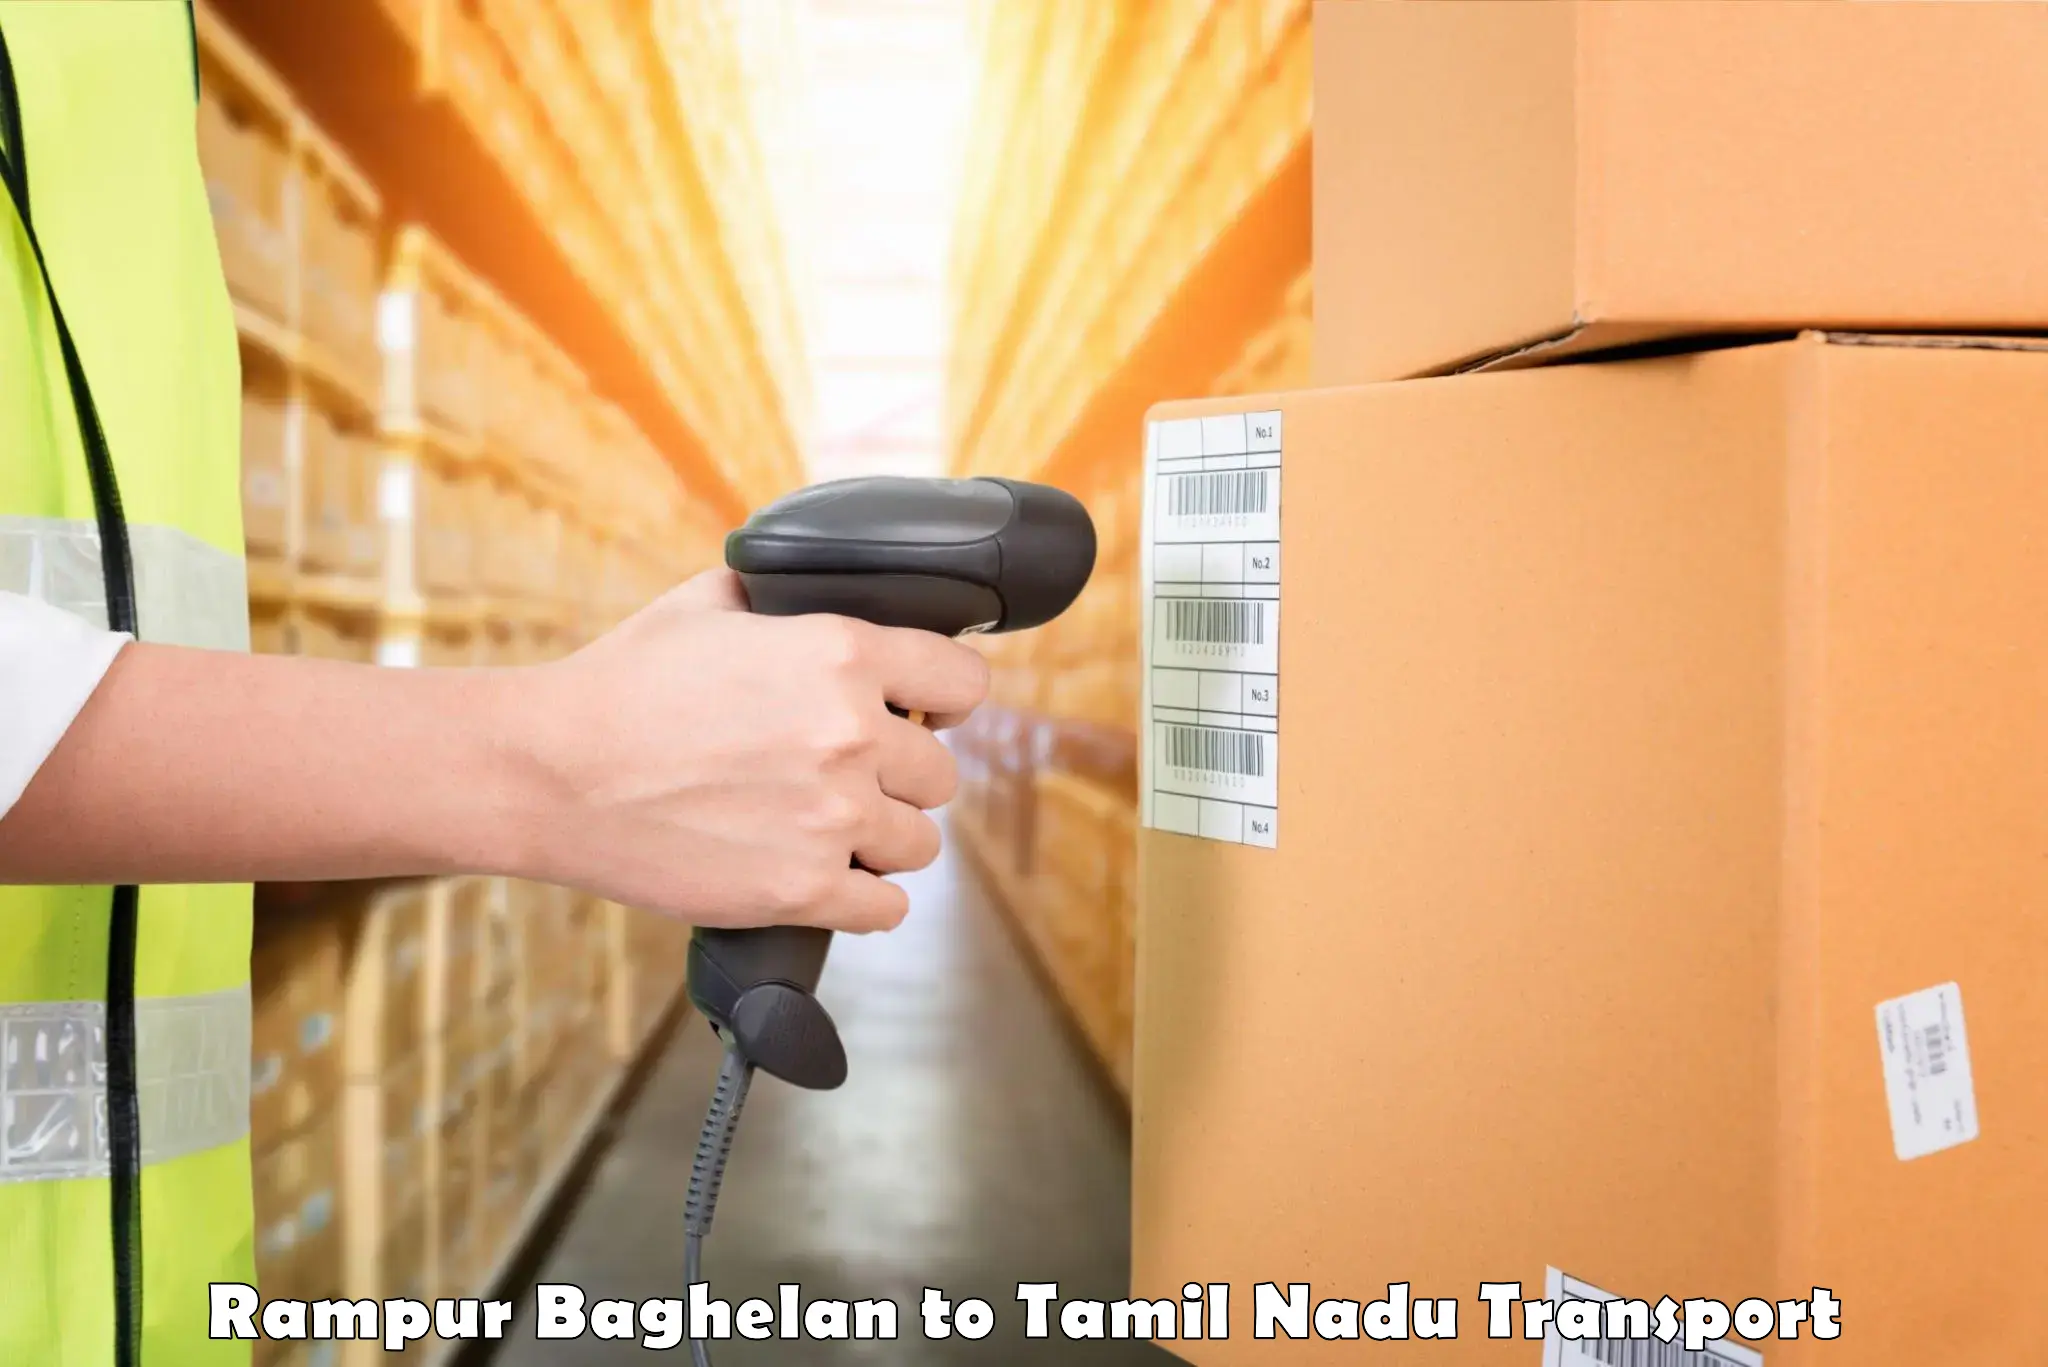 Road transport online services Rampur Baghelan to Gobichettipalayam